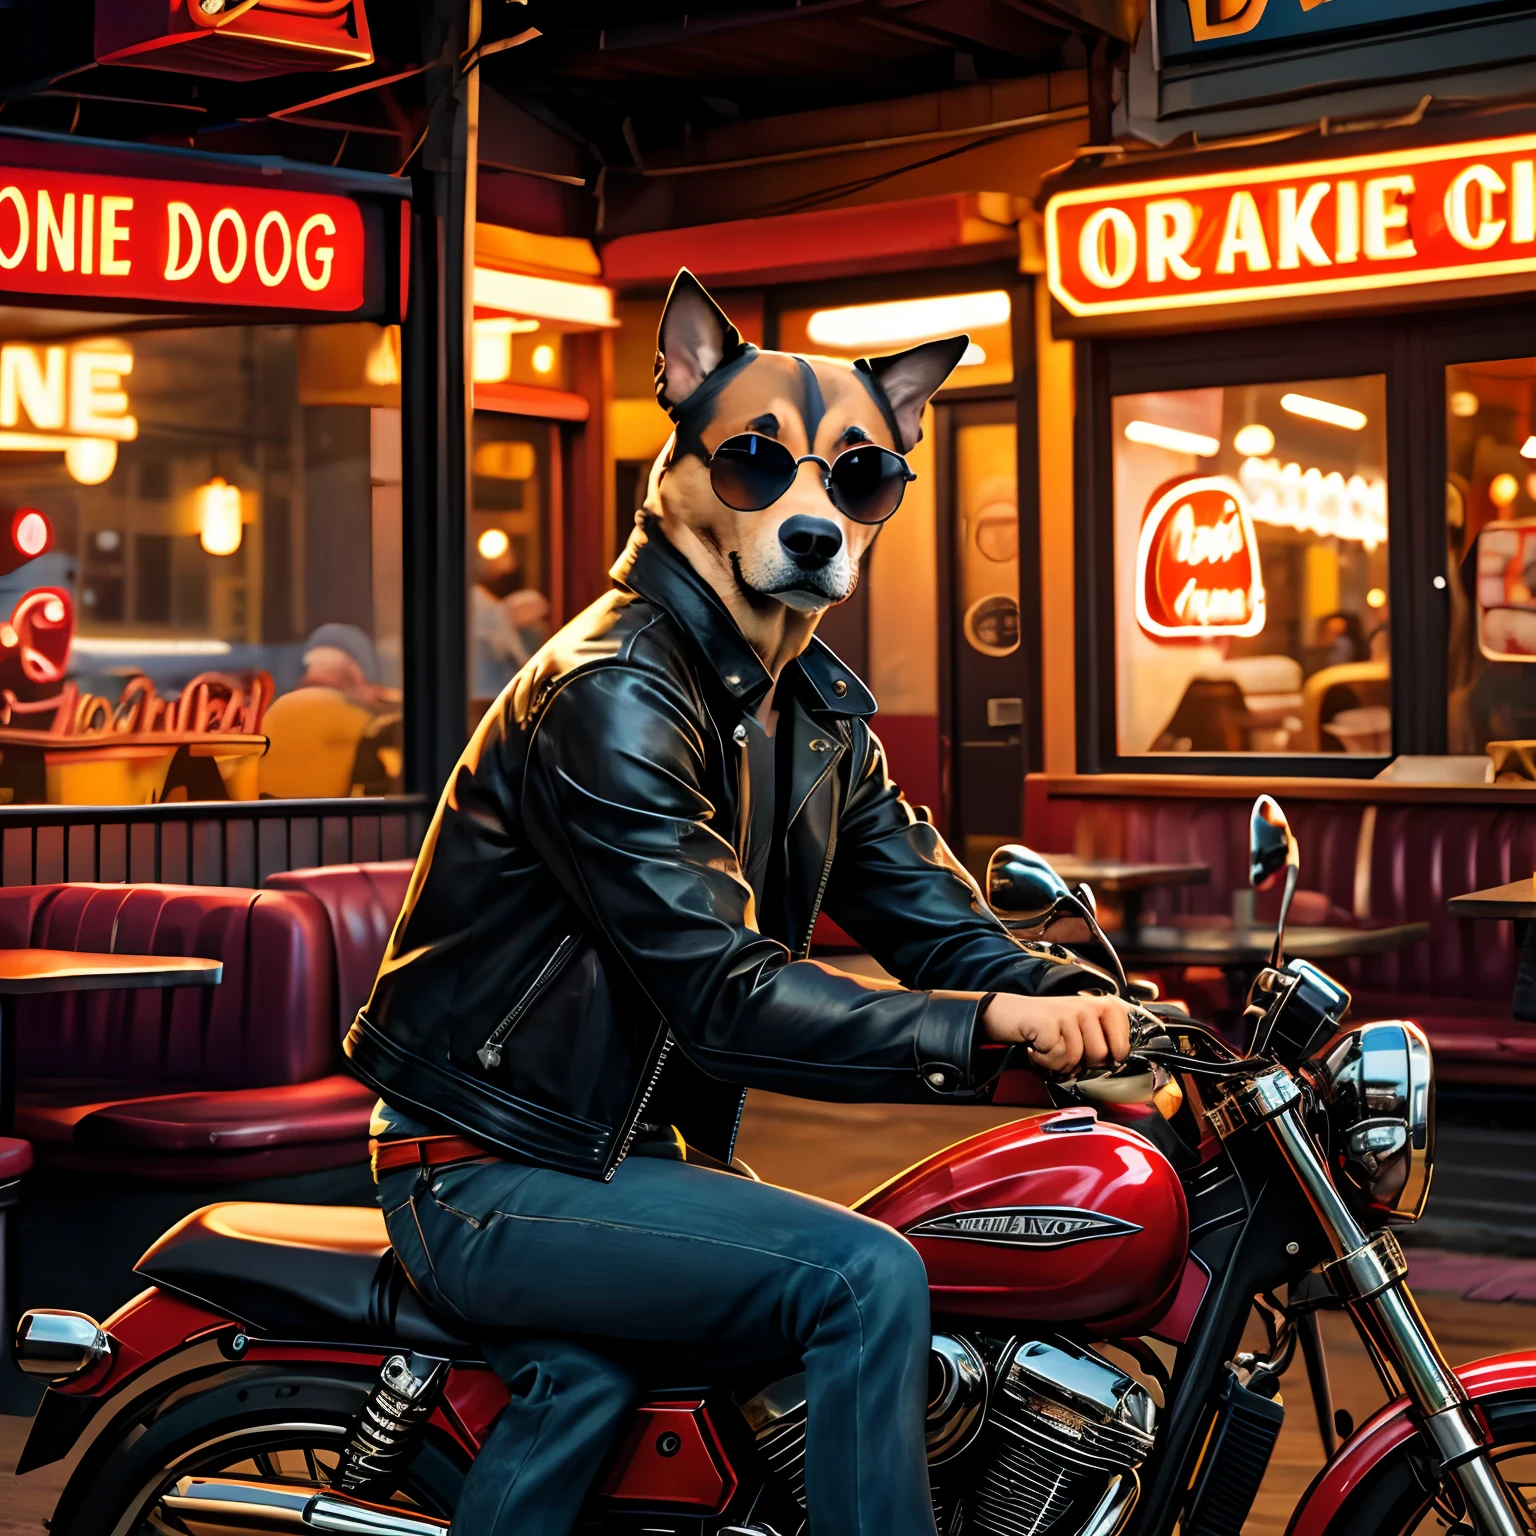 Create an image of a dog wearing a leather jacket and sunglasses, sitting on a motorcycle in front of a diner. The dog has a sad and  expression, as if he is waiting for someone who never shows up. The diner has a neon sign that says “Port Alveridge”. The image should have a realistic and detailed style, similar to the paintings of Ivan Clarke, the artist of the  Dog. Use warm and vibrant colors to contrast the mood of the dog.